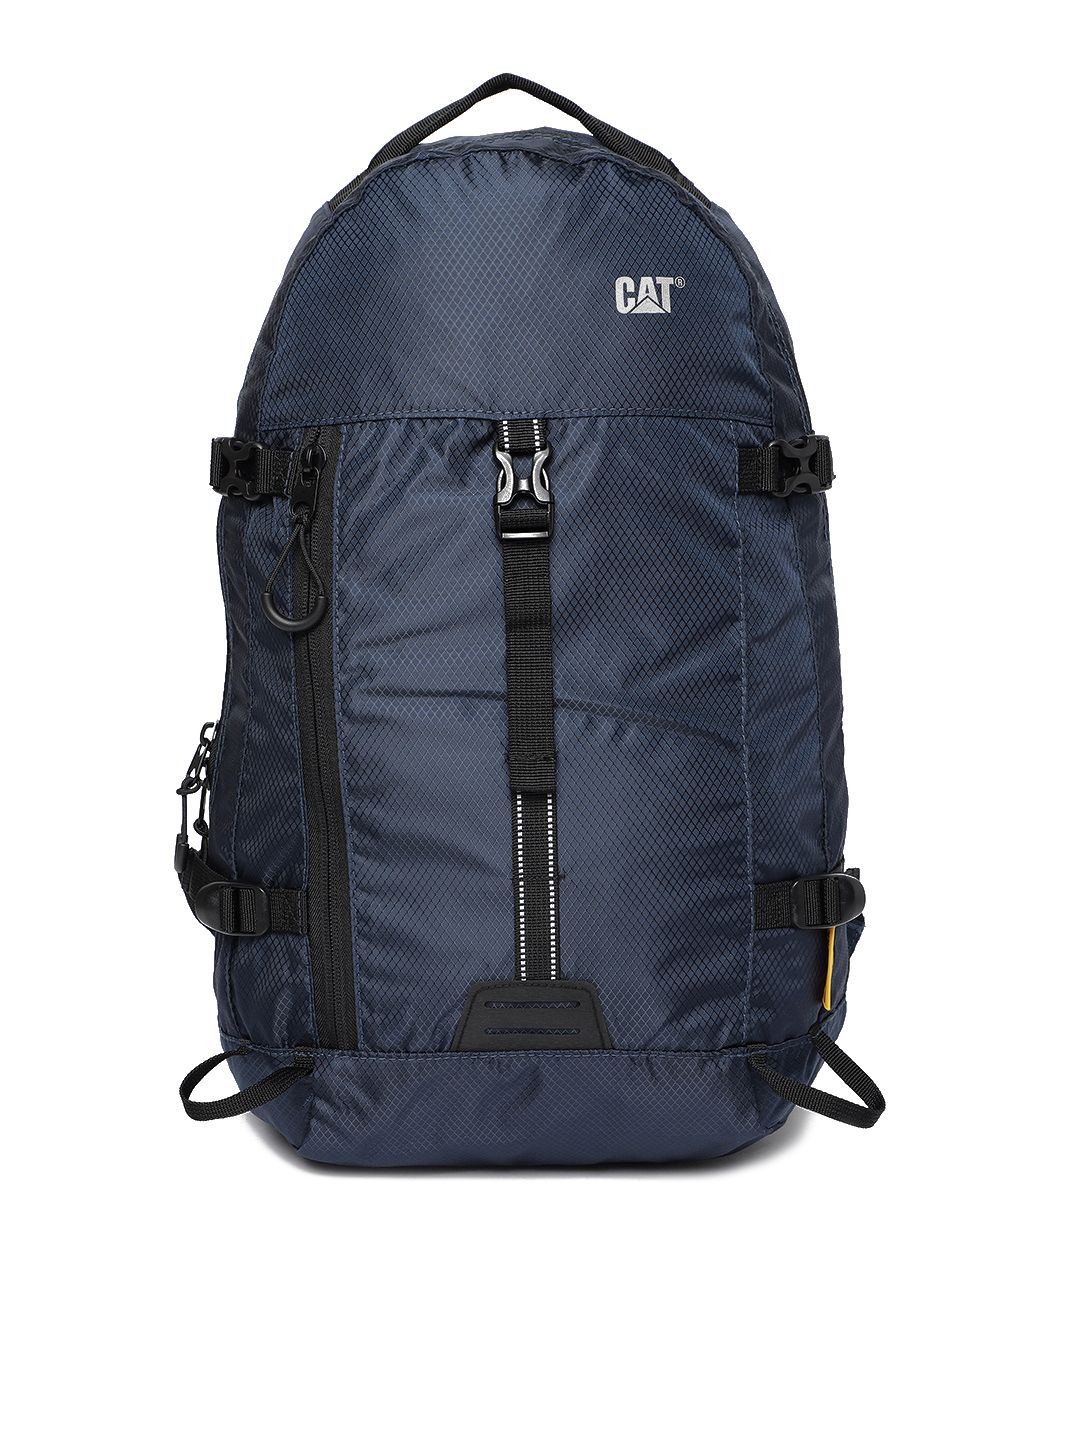 CAT Unisex Blue Solid Backpack Price in India